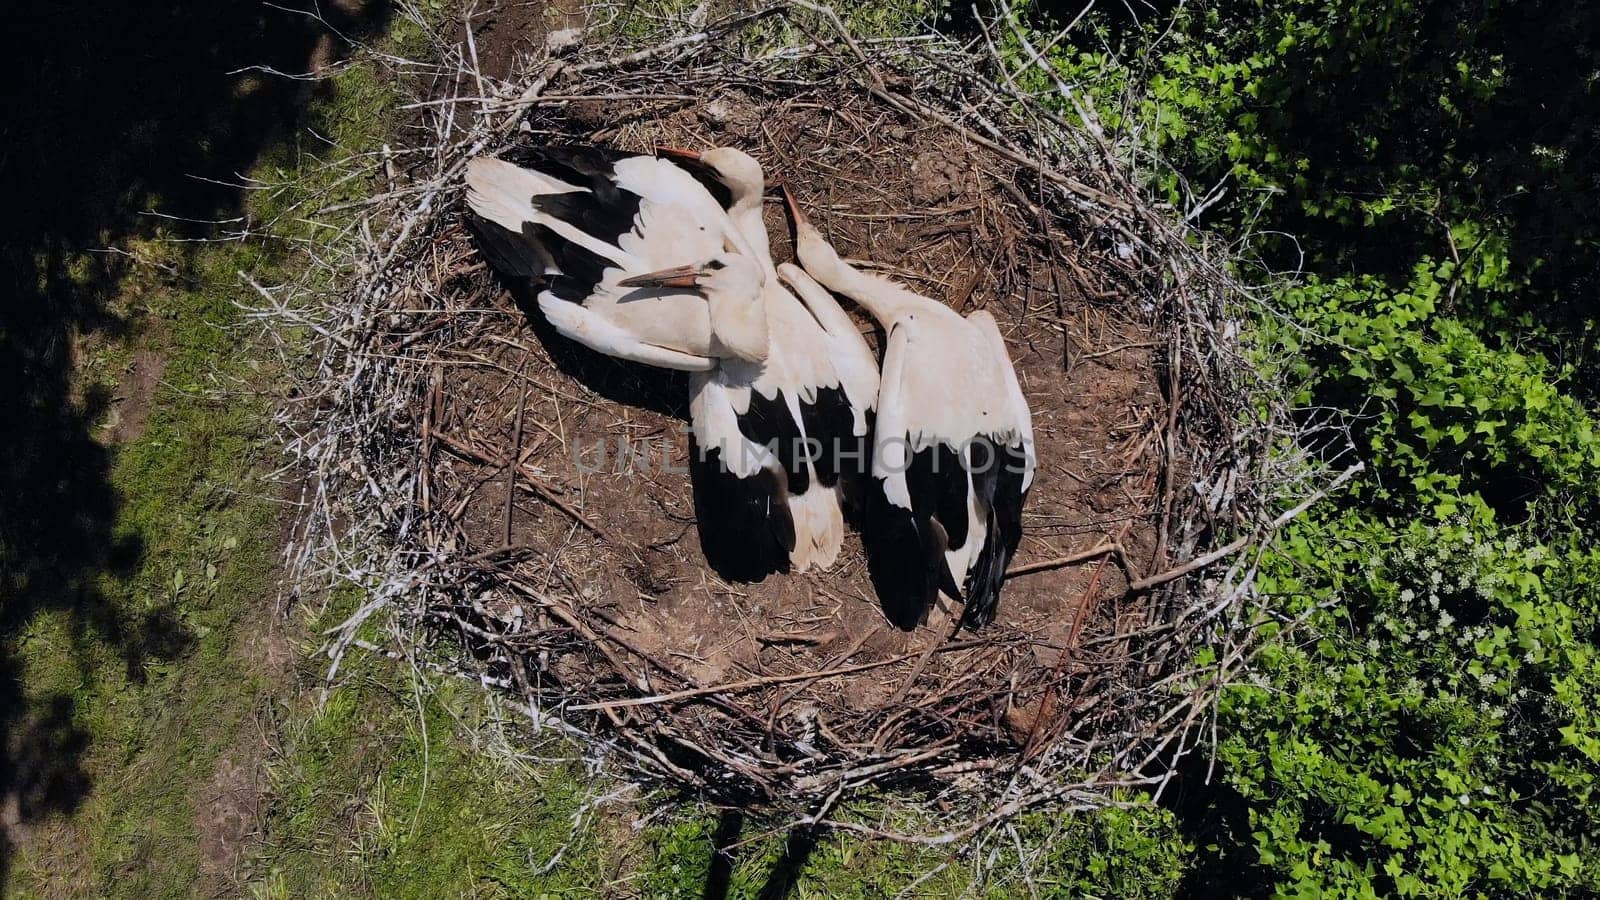 Storks nest with chicks. Drone view